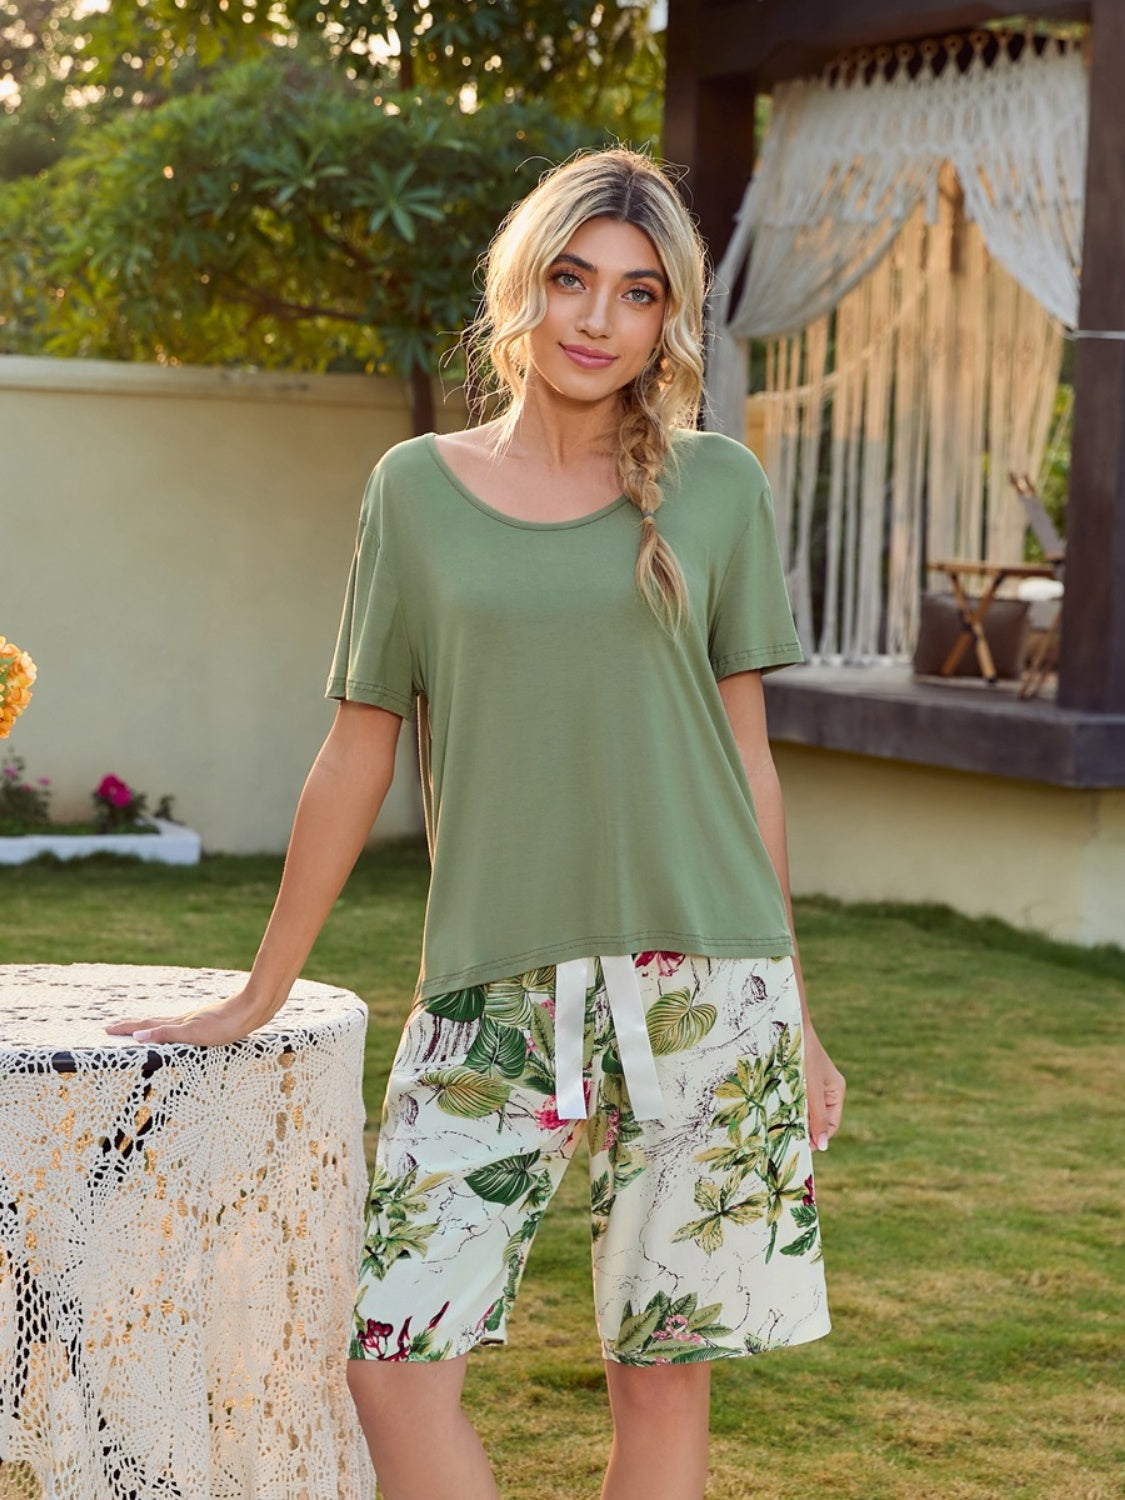 Short Sleeve Top and Printed Shorts Lounge Set - Tophatter Deals and Online Shopping - Electronics, Jewelry, Beauty, Health, Gadgets, Fashion - Tophatter's Discounts & Offers - tophatters